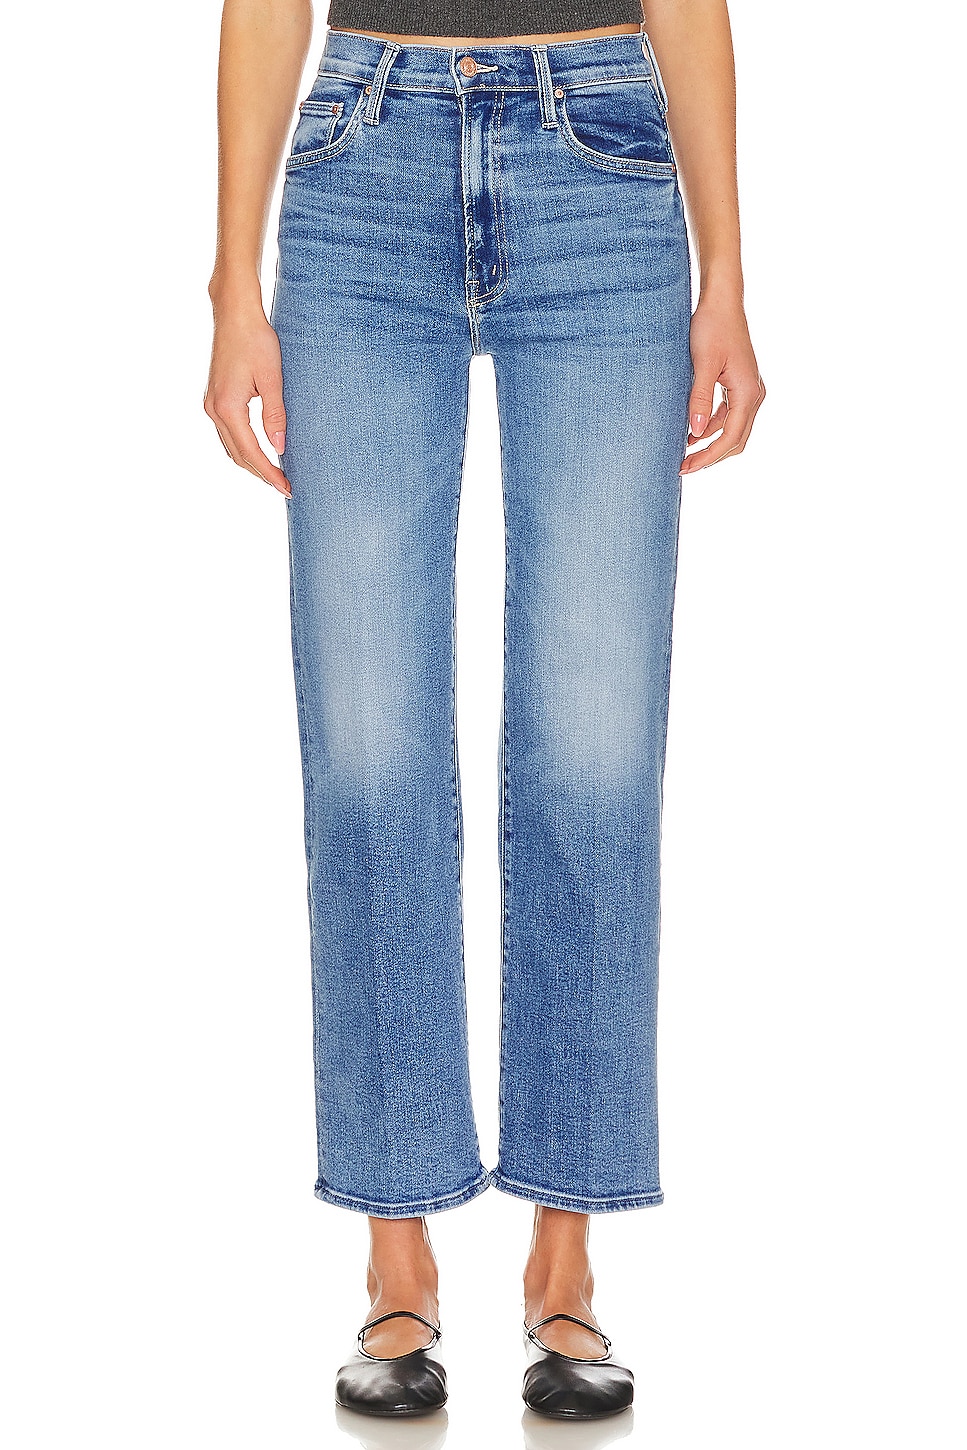 Agolde Dara Mid-rise Wide-leg Jeans in Blue